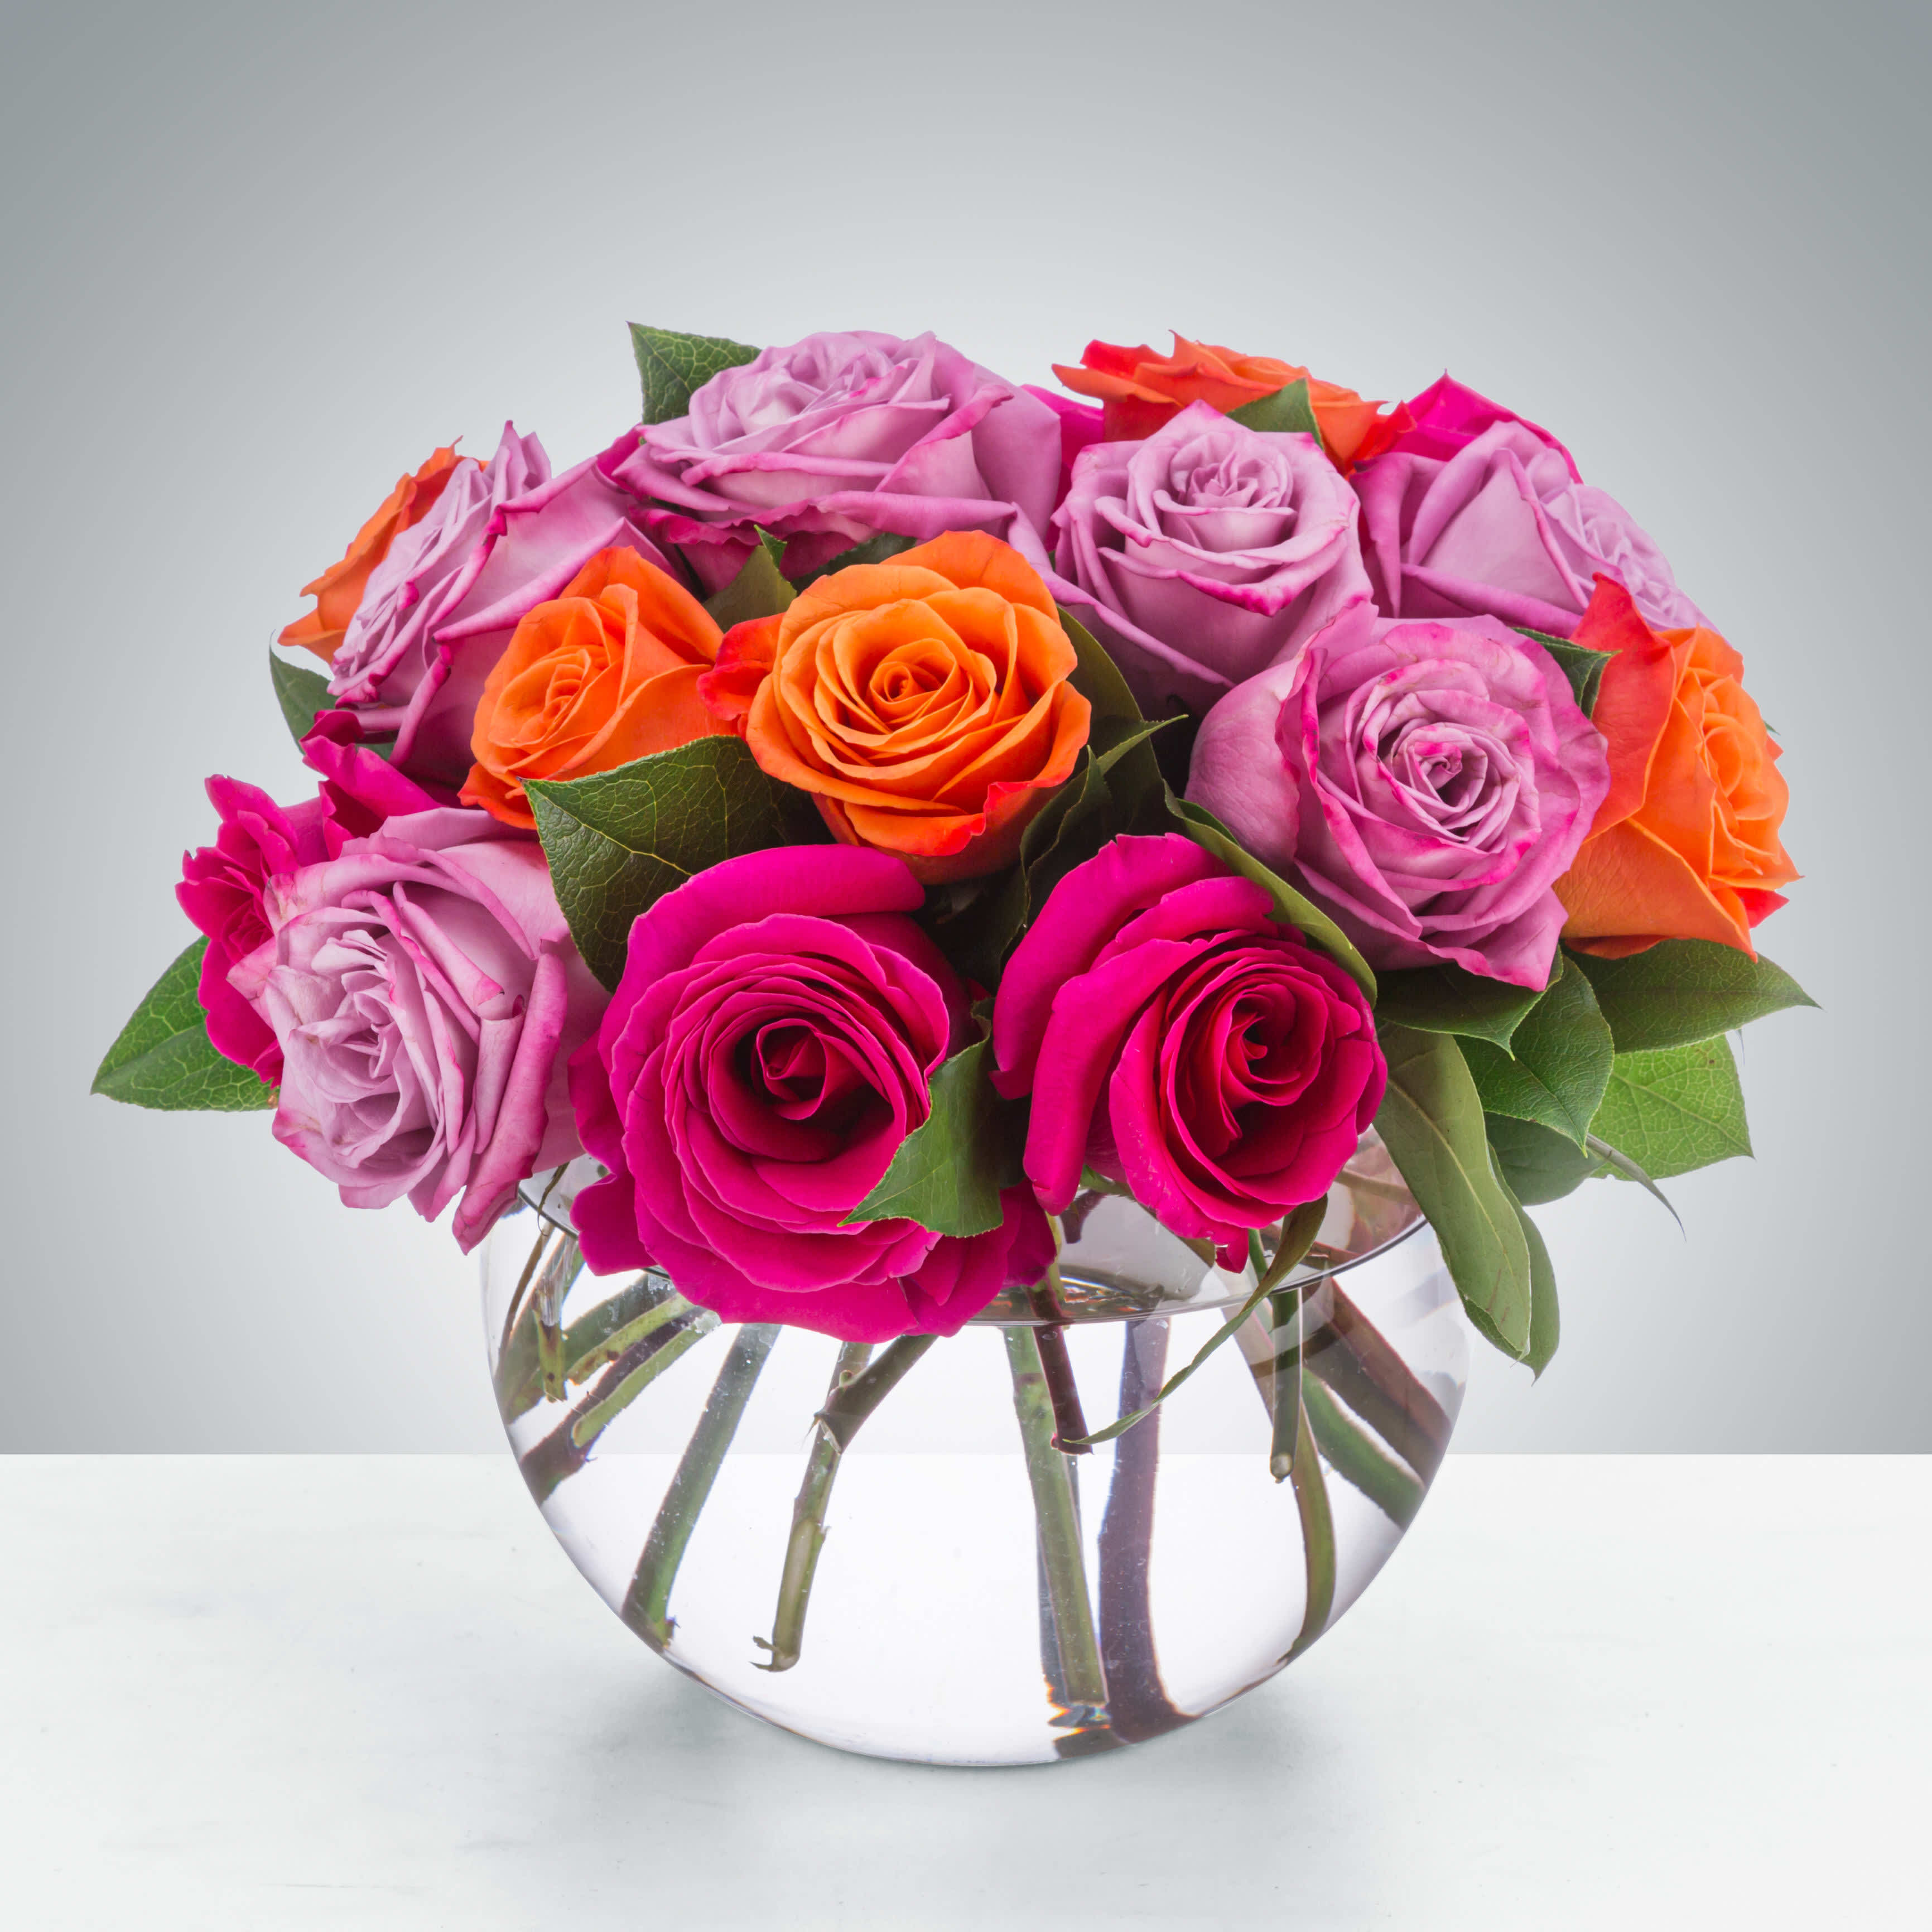 Daybreak - A lovely bowl of colorful roses brightens and lifts any room (and relationship!) A great gift for sending on Valentine's Day to your significant other, your friend, or even your mom!  Approximate Dimensions: 11''D x 11''H